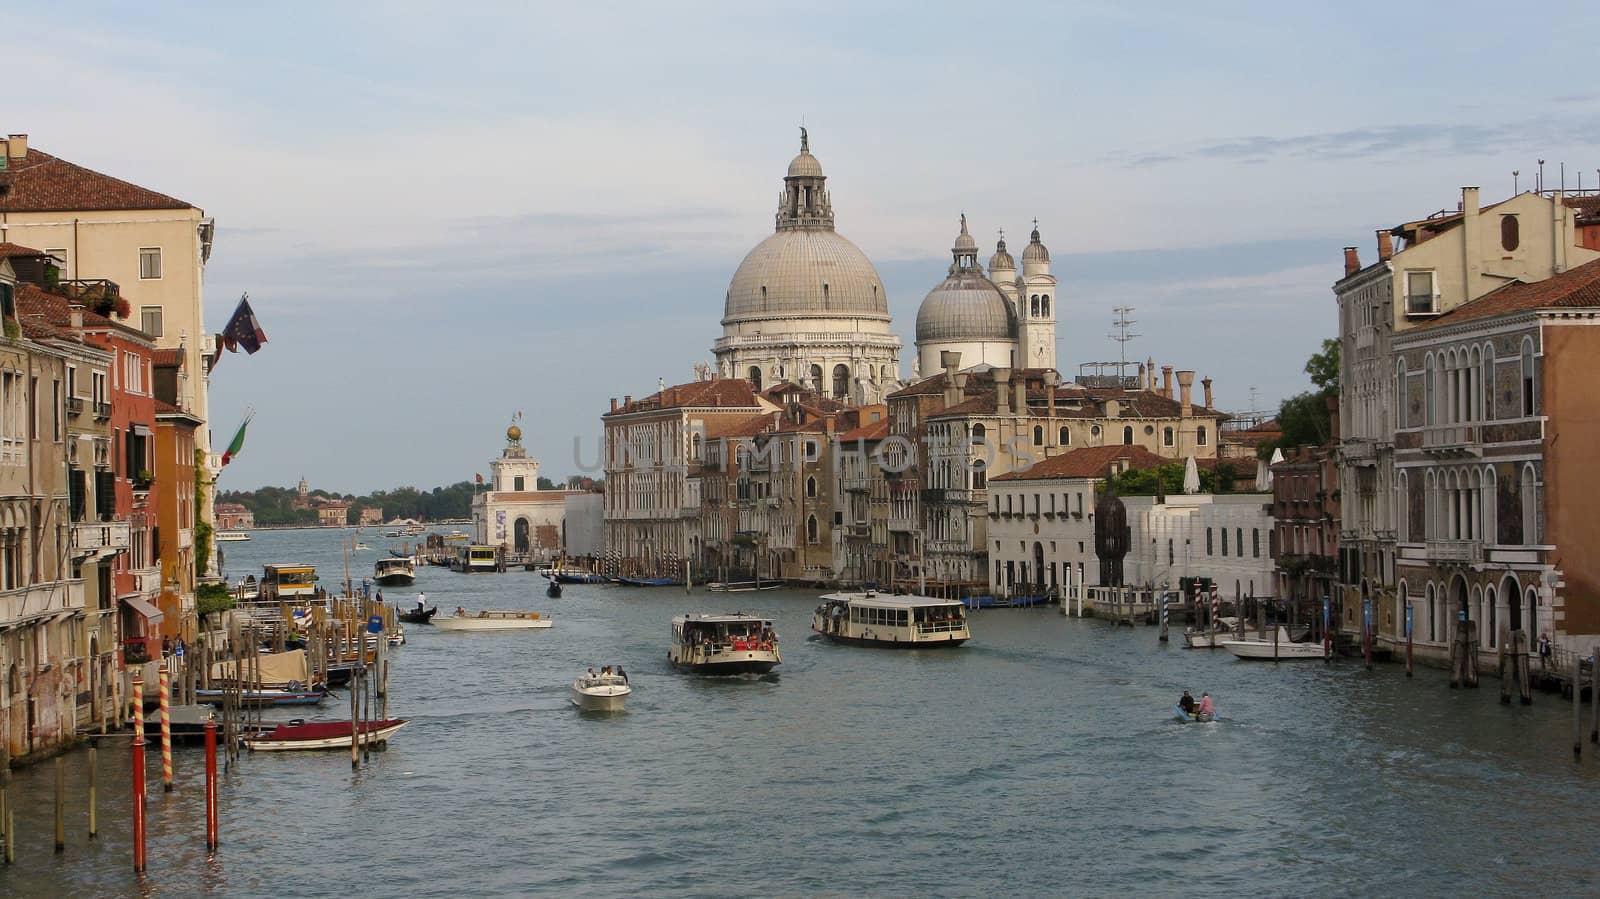 panorama of the grand canal in venice, italy